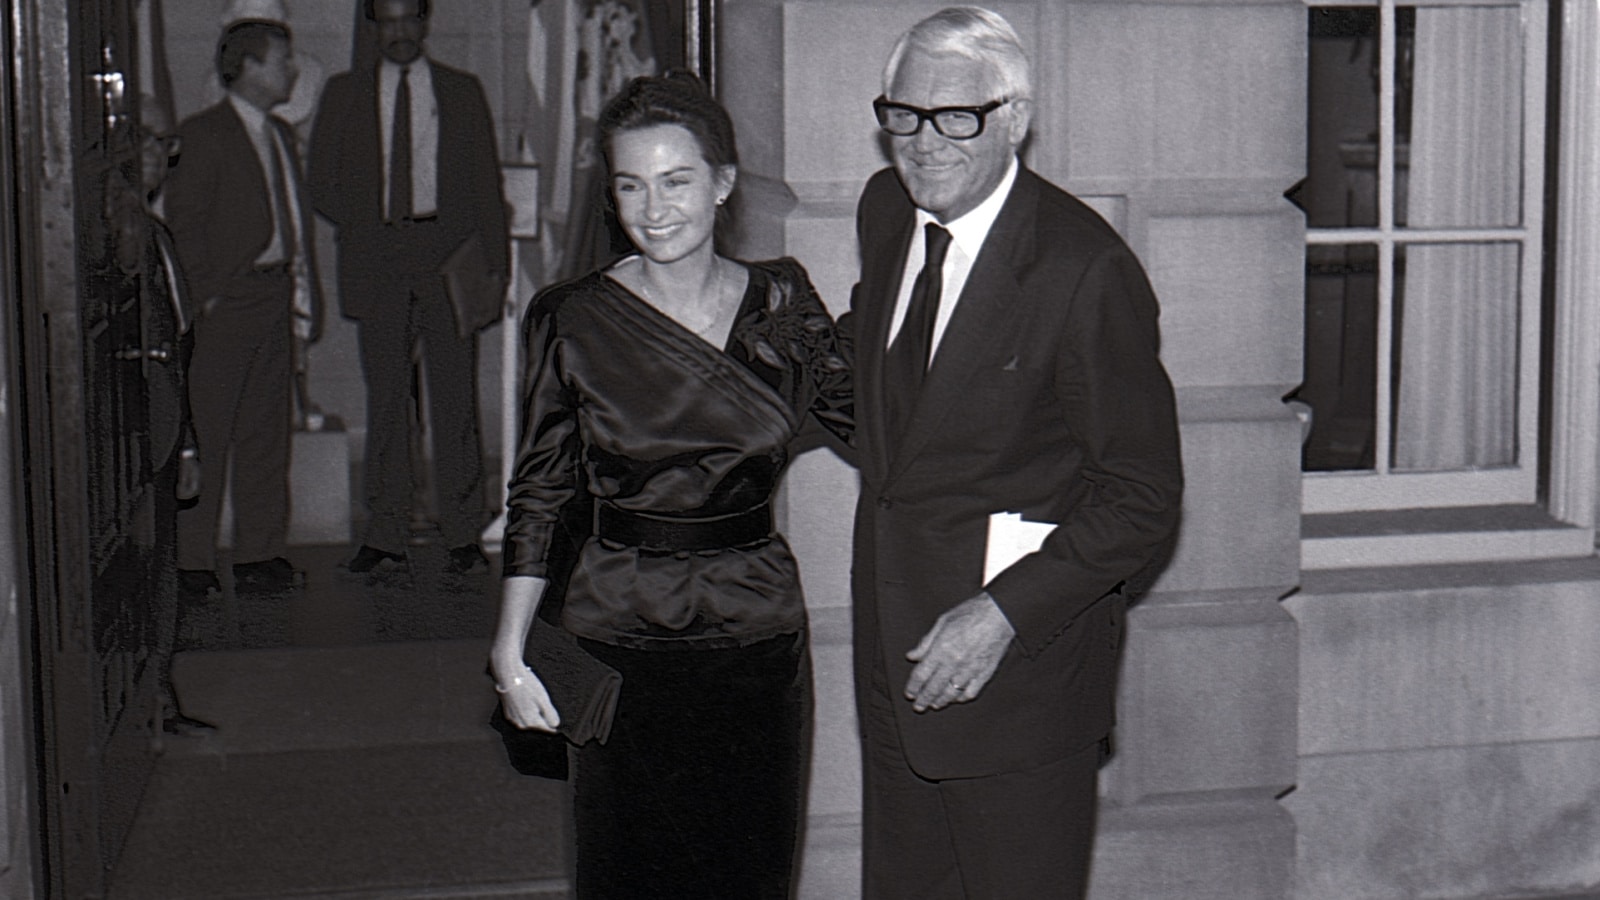 Washington DC, USA, February 18, 1984 Cary Grant and his wife Barbara Grant leaving the Princess Grace Foundation gala that was hosted by President Ronald Reagan